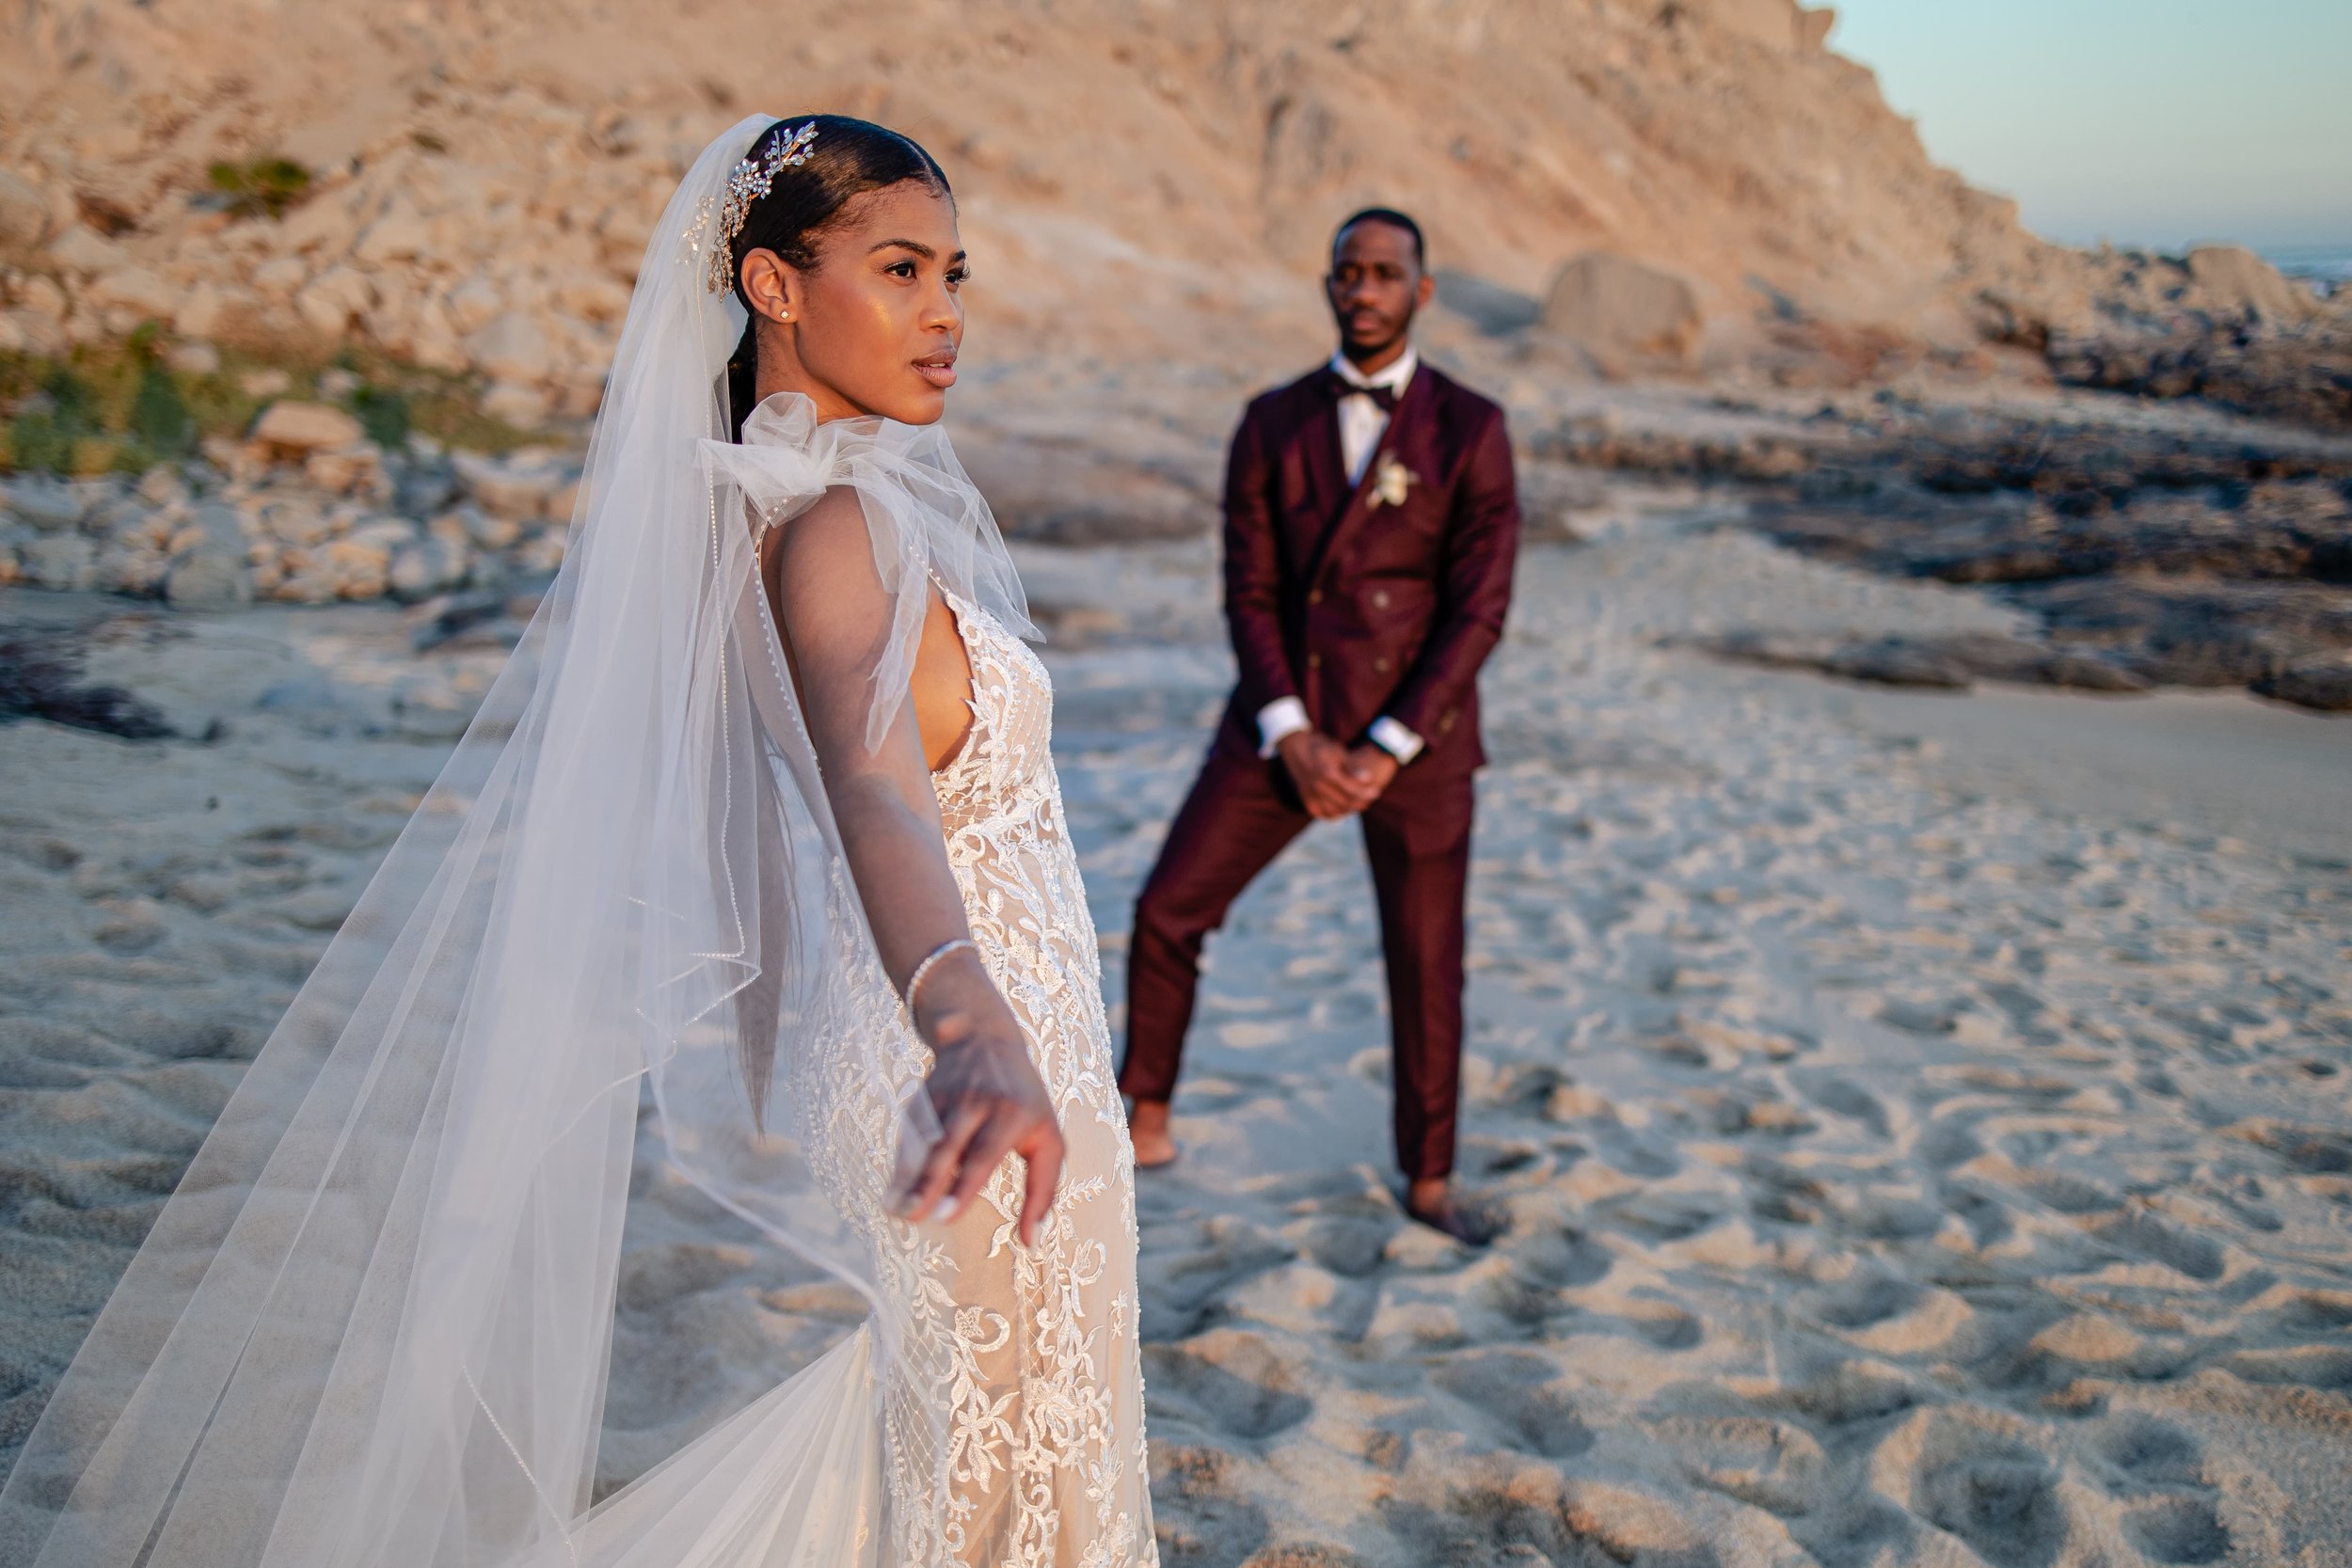  A bride in an intricate lace gown and long veil stands on a sandy beach, looking off to the side, with a groom in a sharp brown suit looking towards her in the background by rocky terrain. 